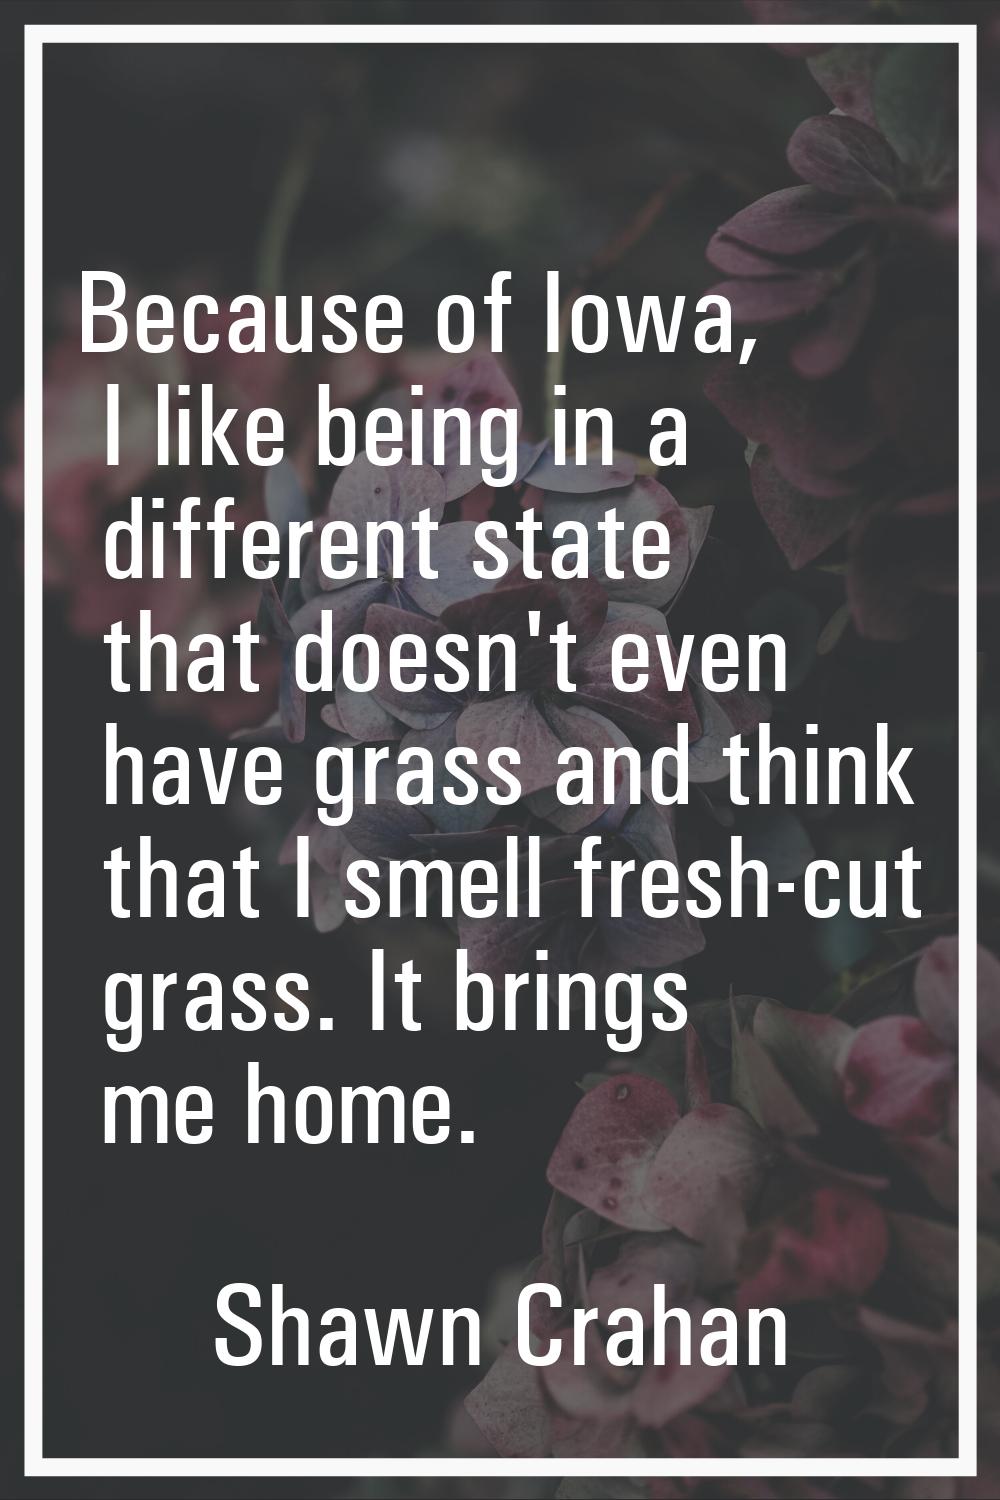 Because of Iowa, I like being in a different state that doesn't even have grass and think that I sm